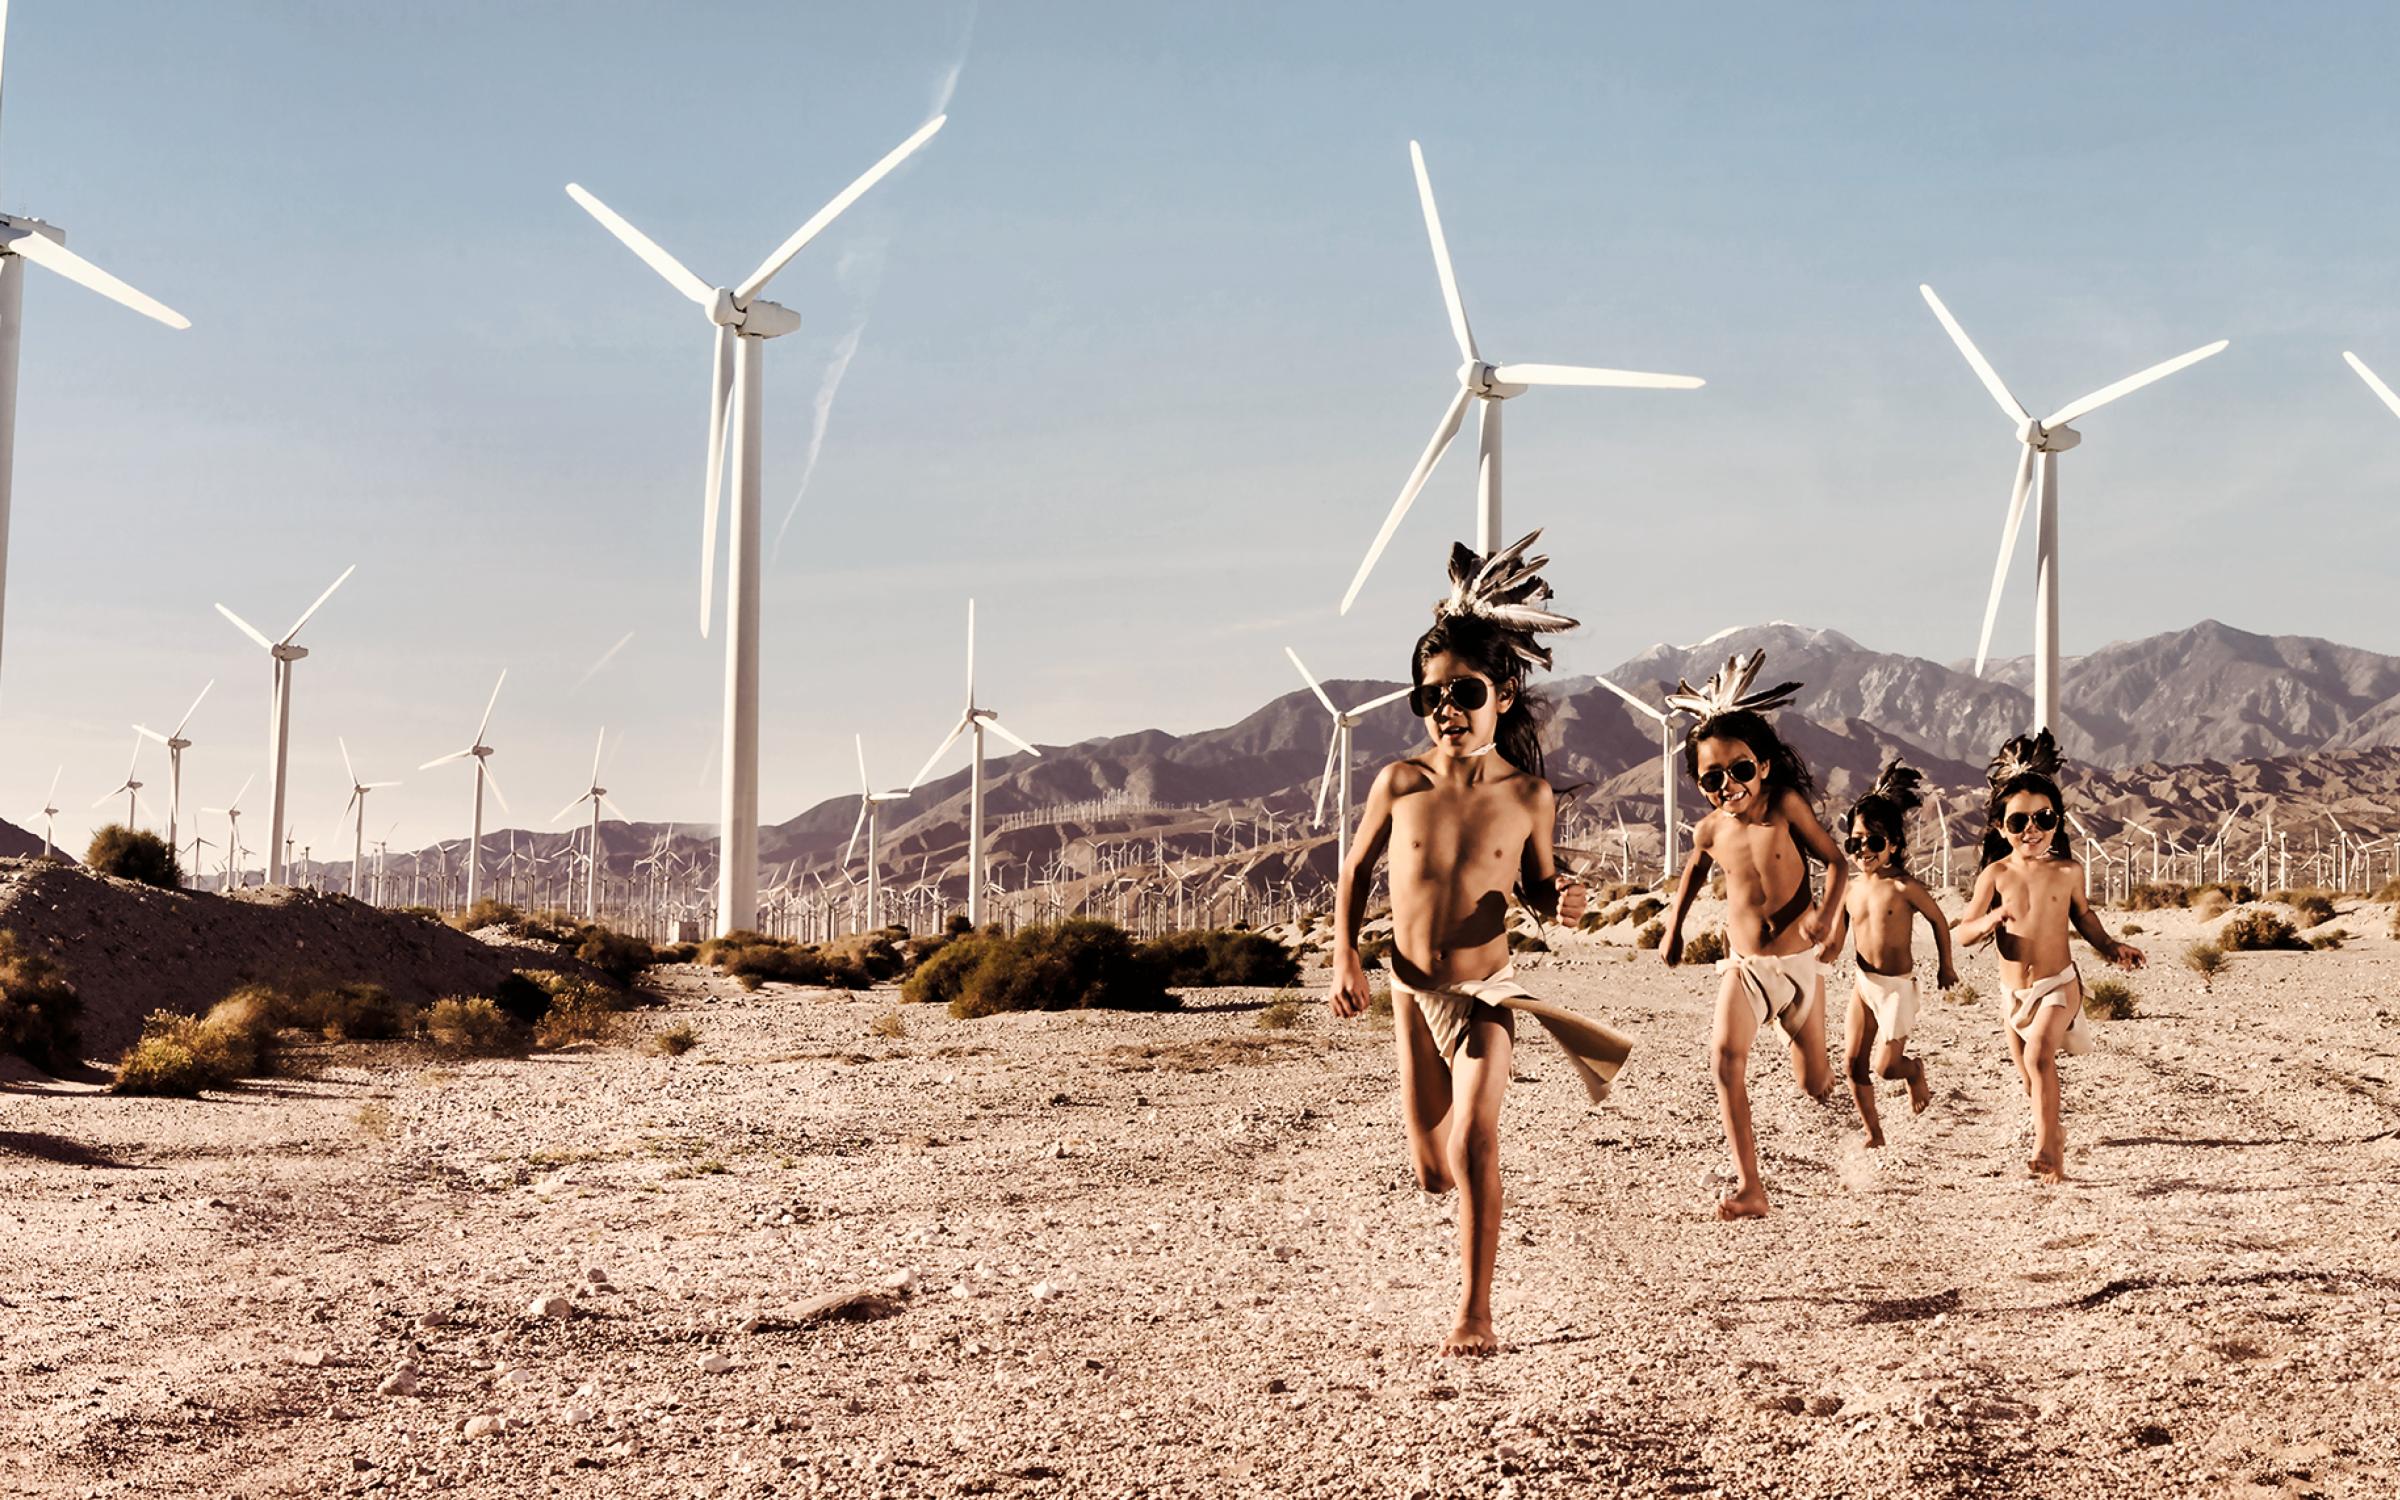 A group of three Indigenous boys in traditional garb running on a desert landscape with wind turbines in the background.